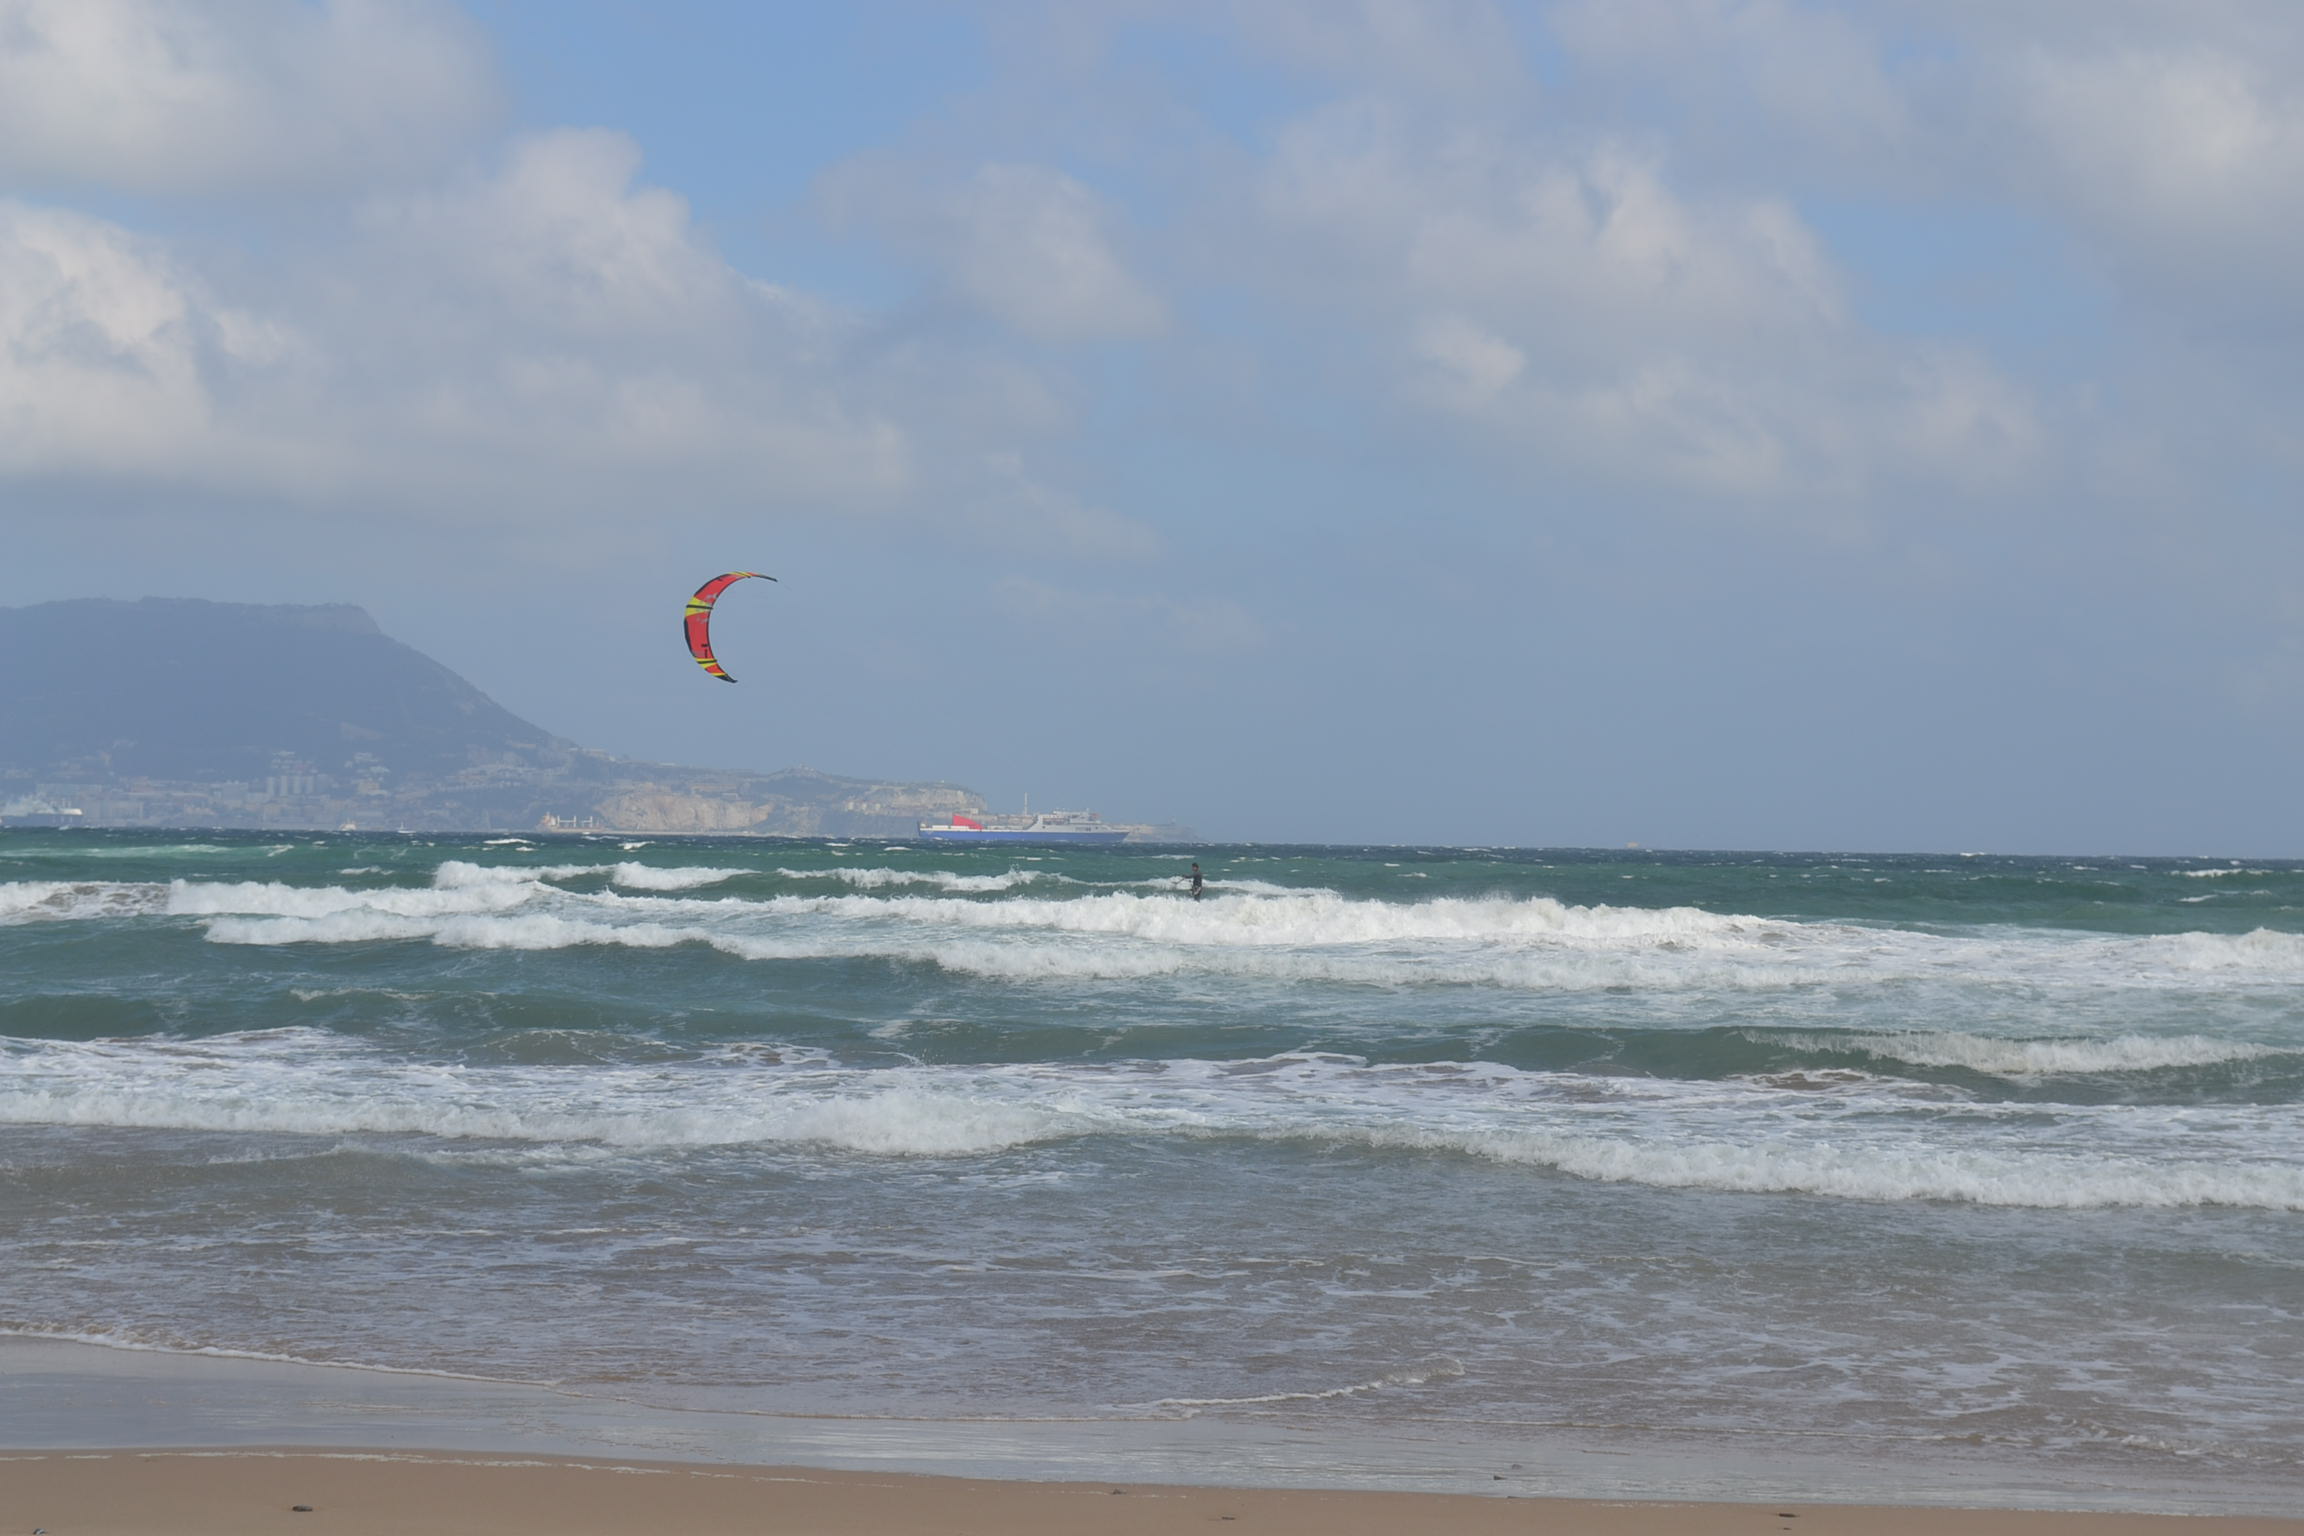 Kiting in Andalusia